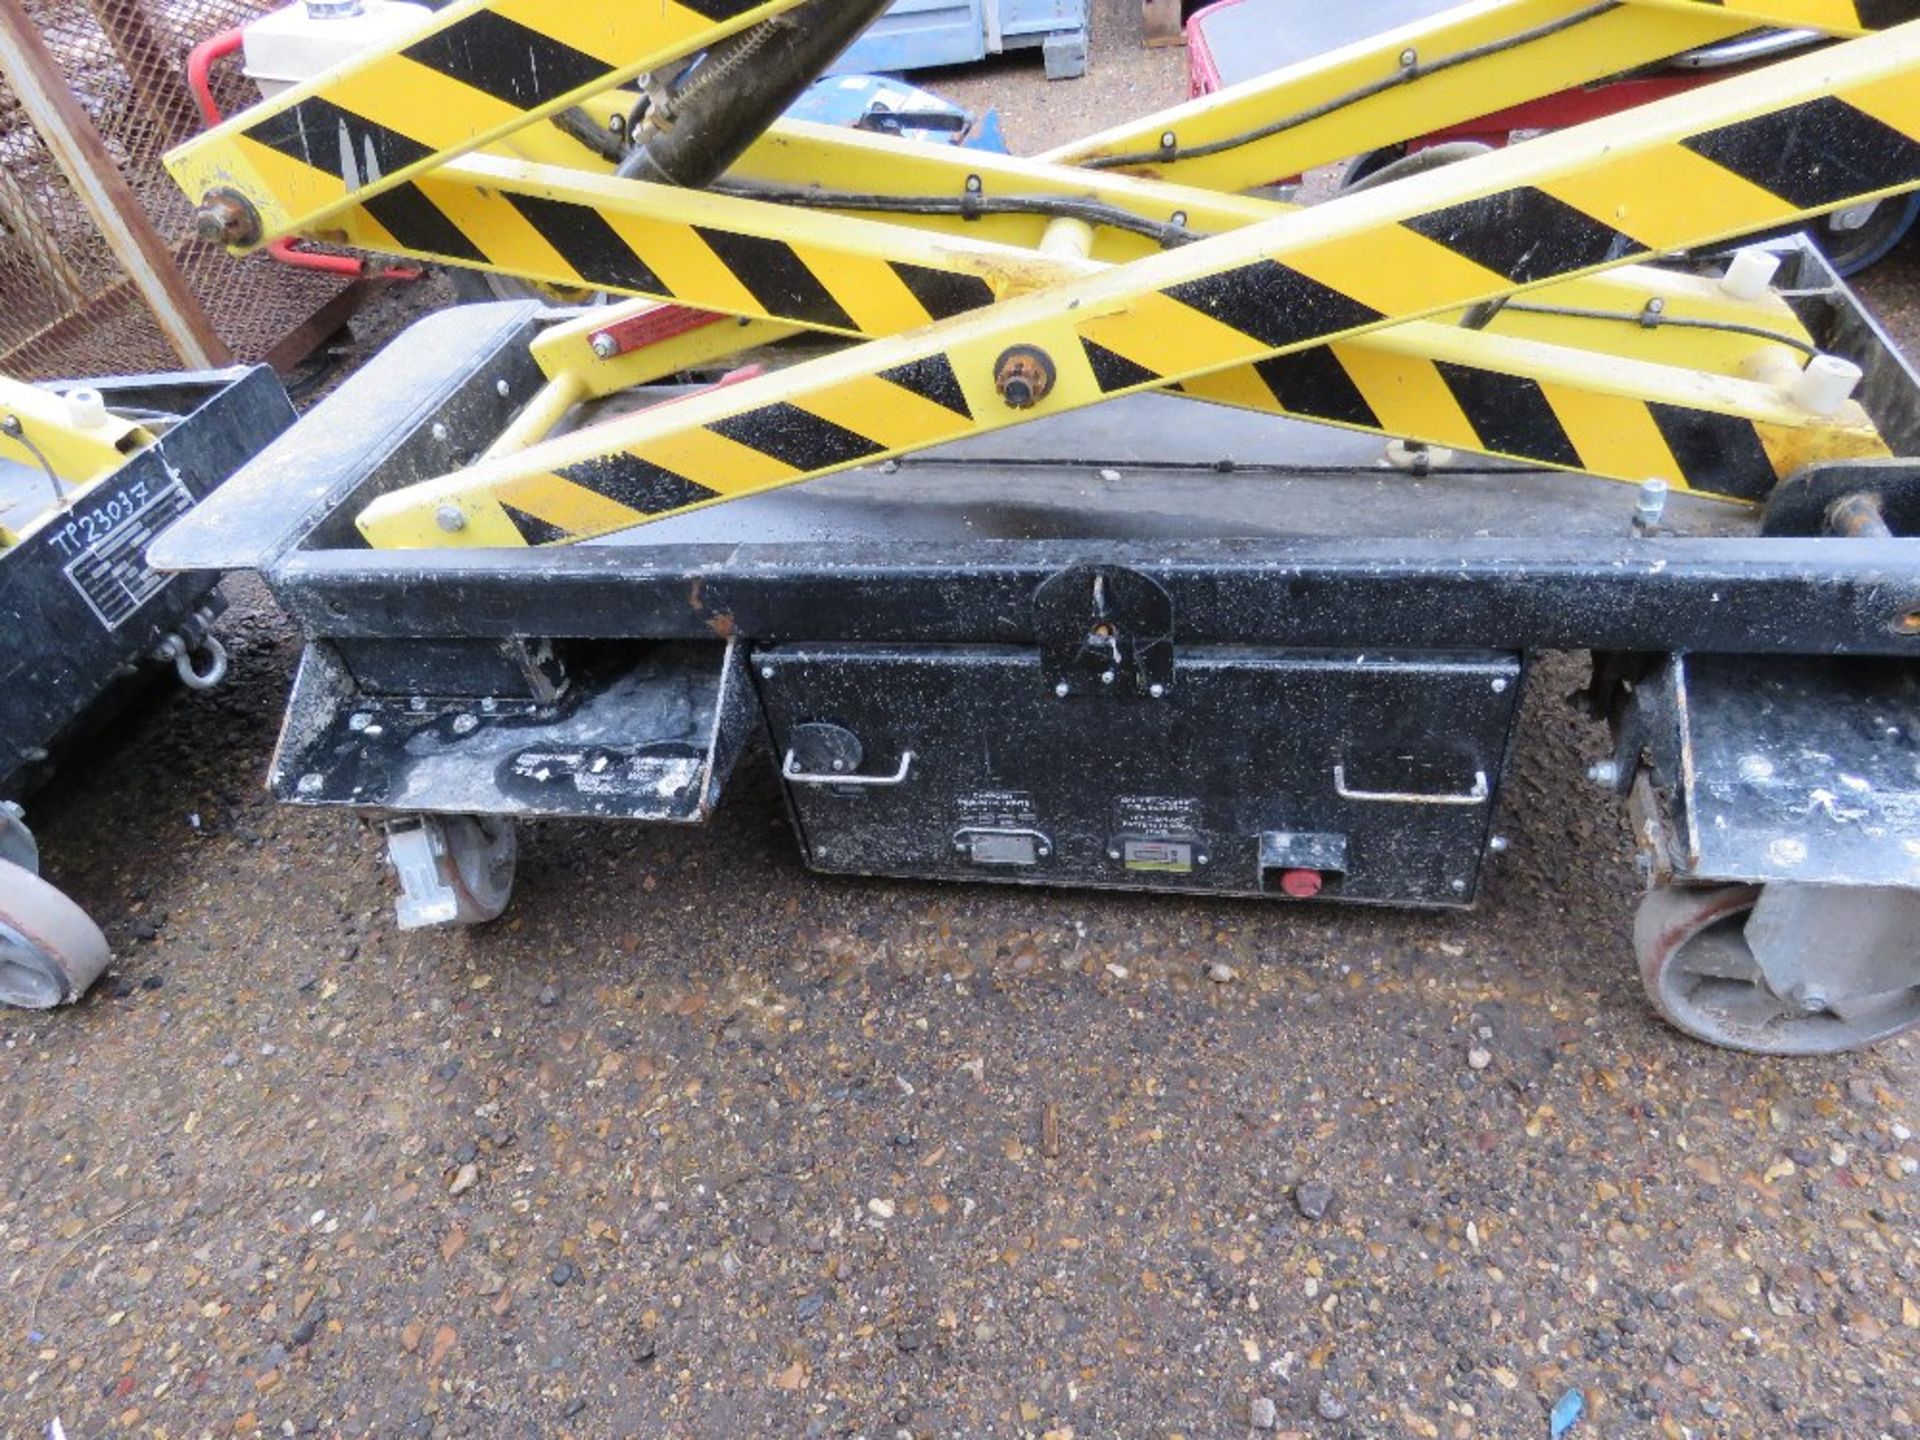 BOSS X3X BATTERY POWERED SCISSOR LIFT UNIT, YEAR 2019. WHEN TESTED PUMP WAS SEEN TO PUMP AND WAS SEE - Image 3 of 7